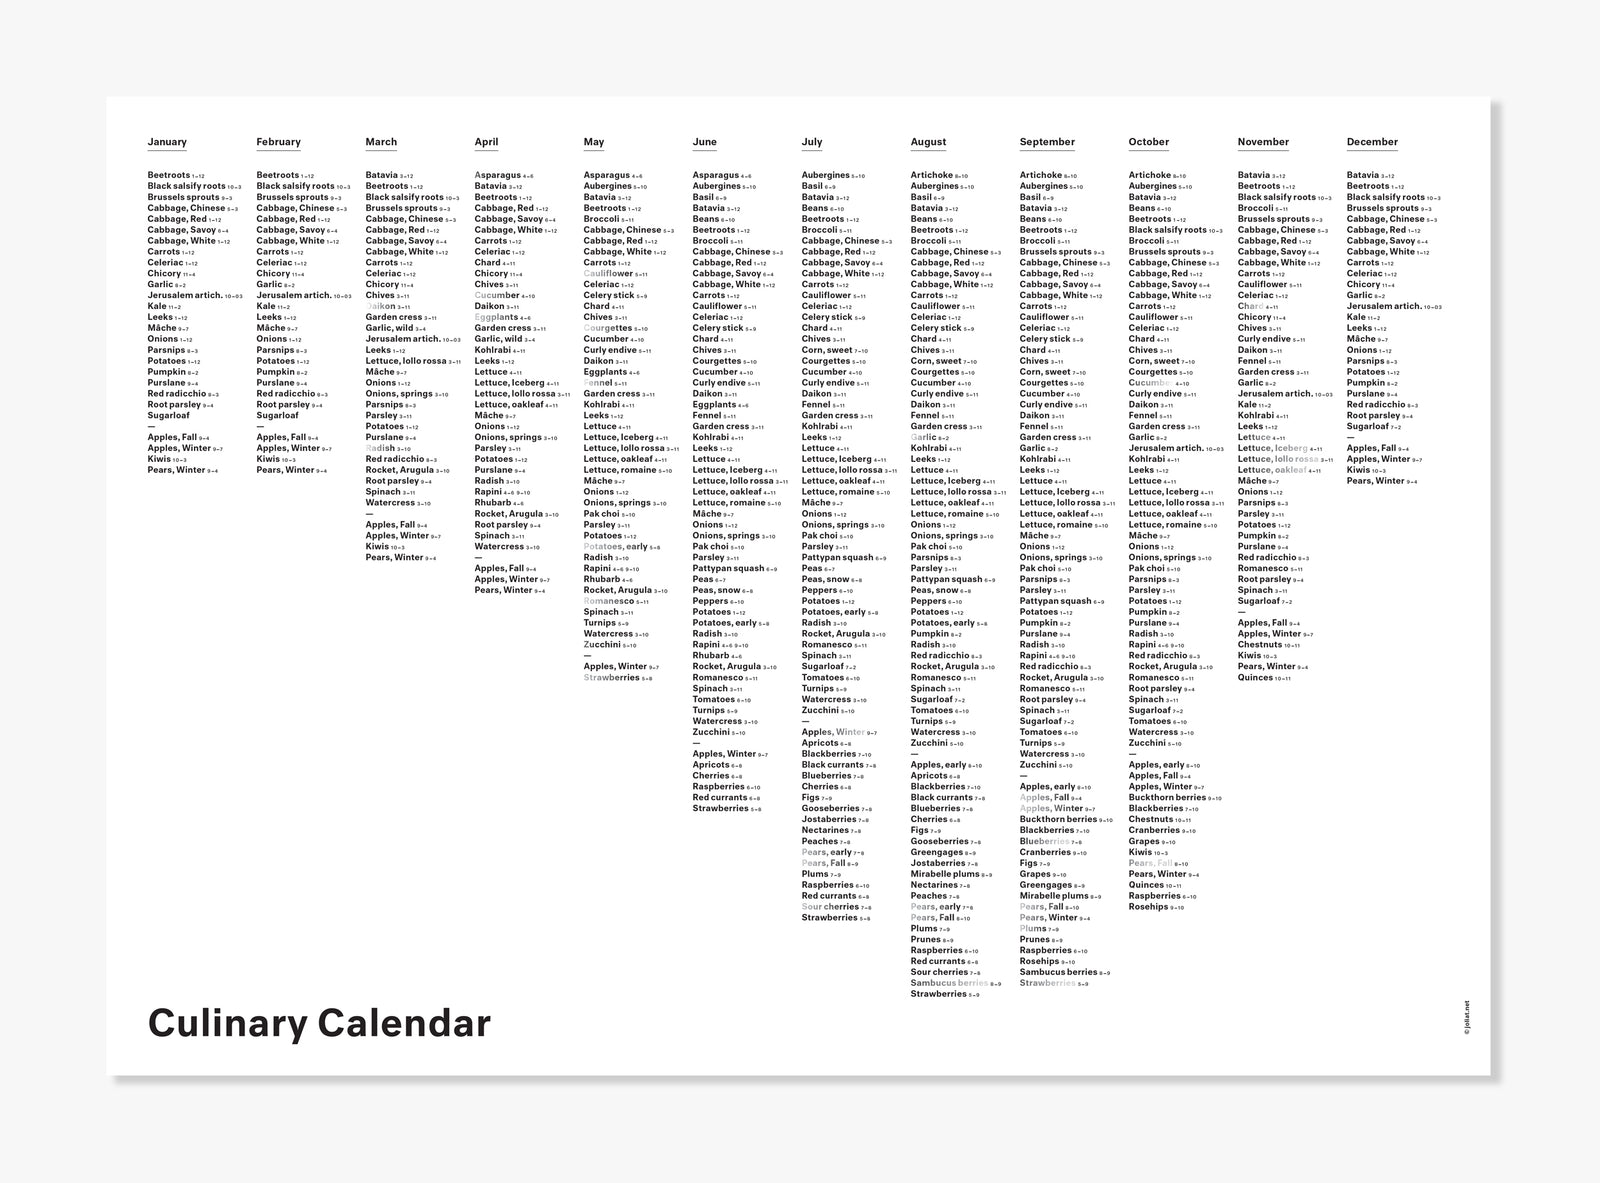 Culinary Calendar, a calendar with food from which month.